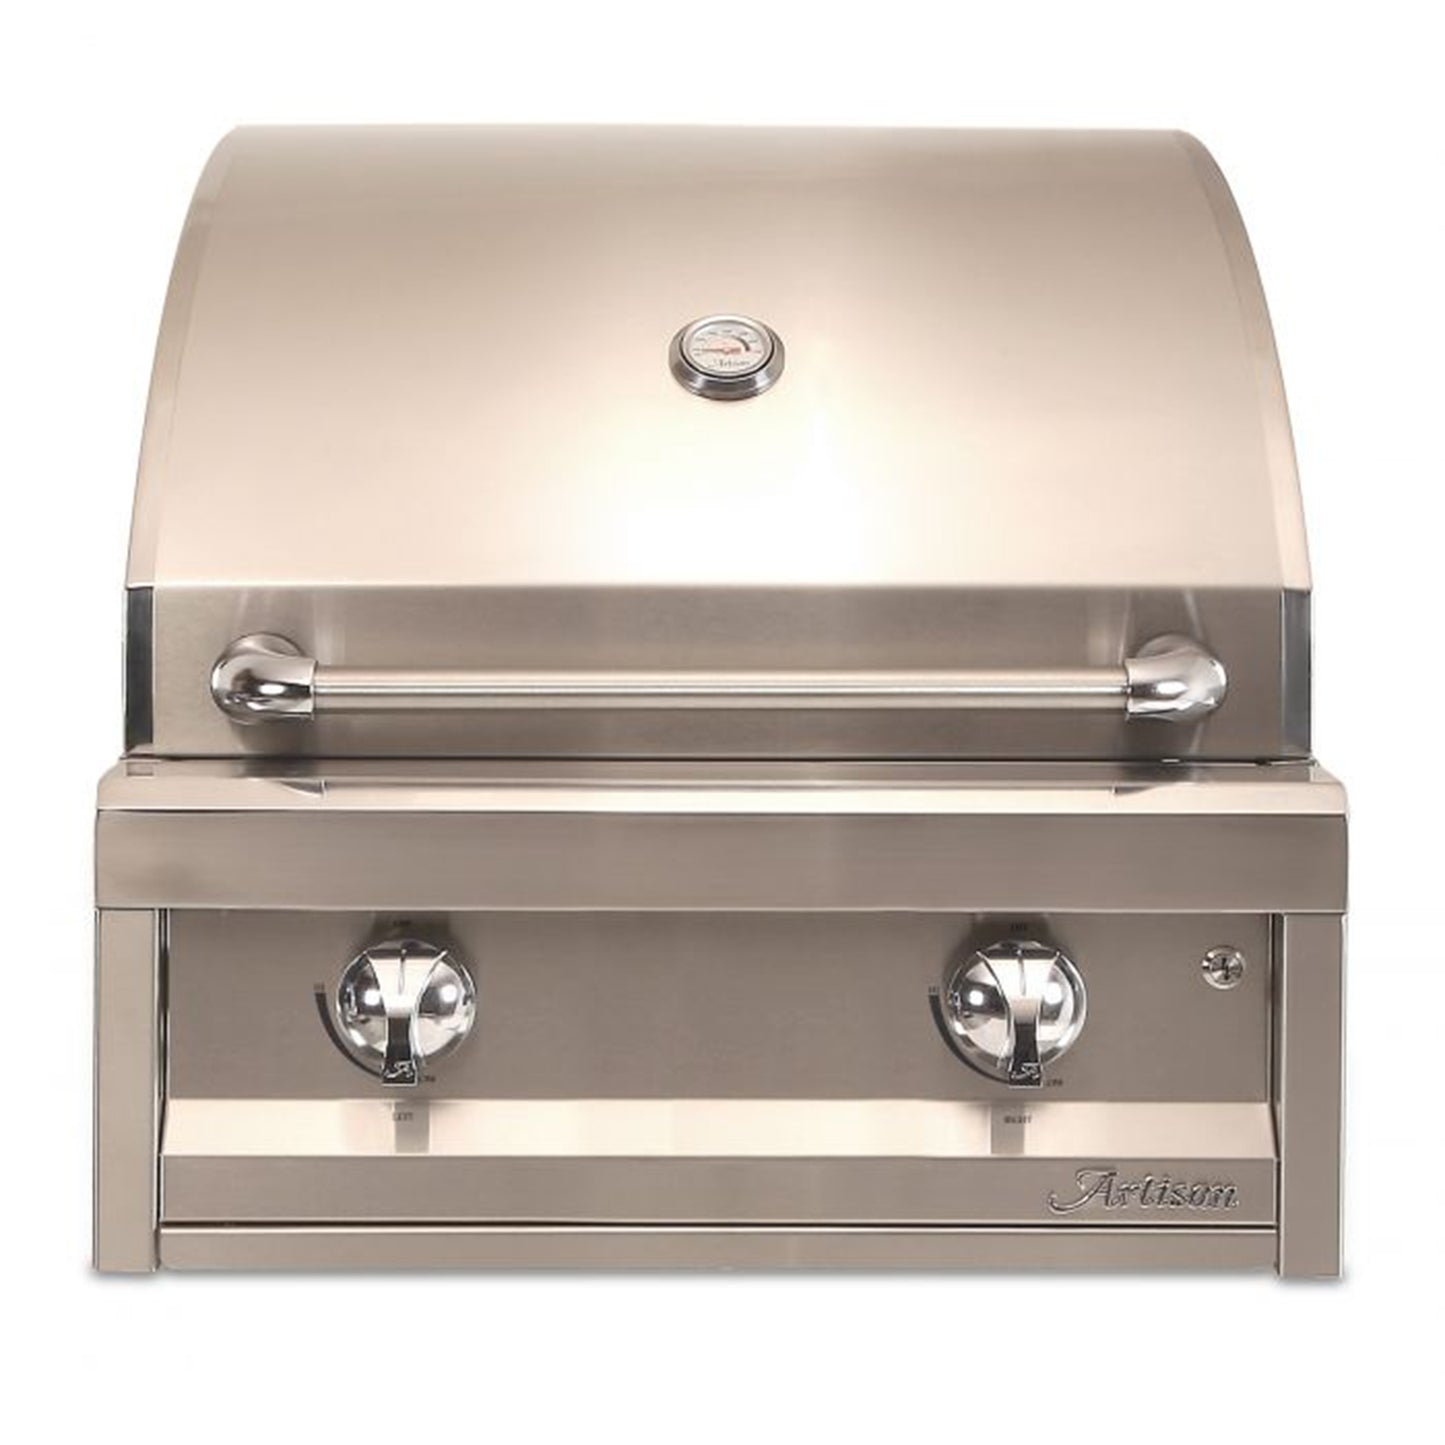 Artisan American Eagle 26-Inch Built-In Grill